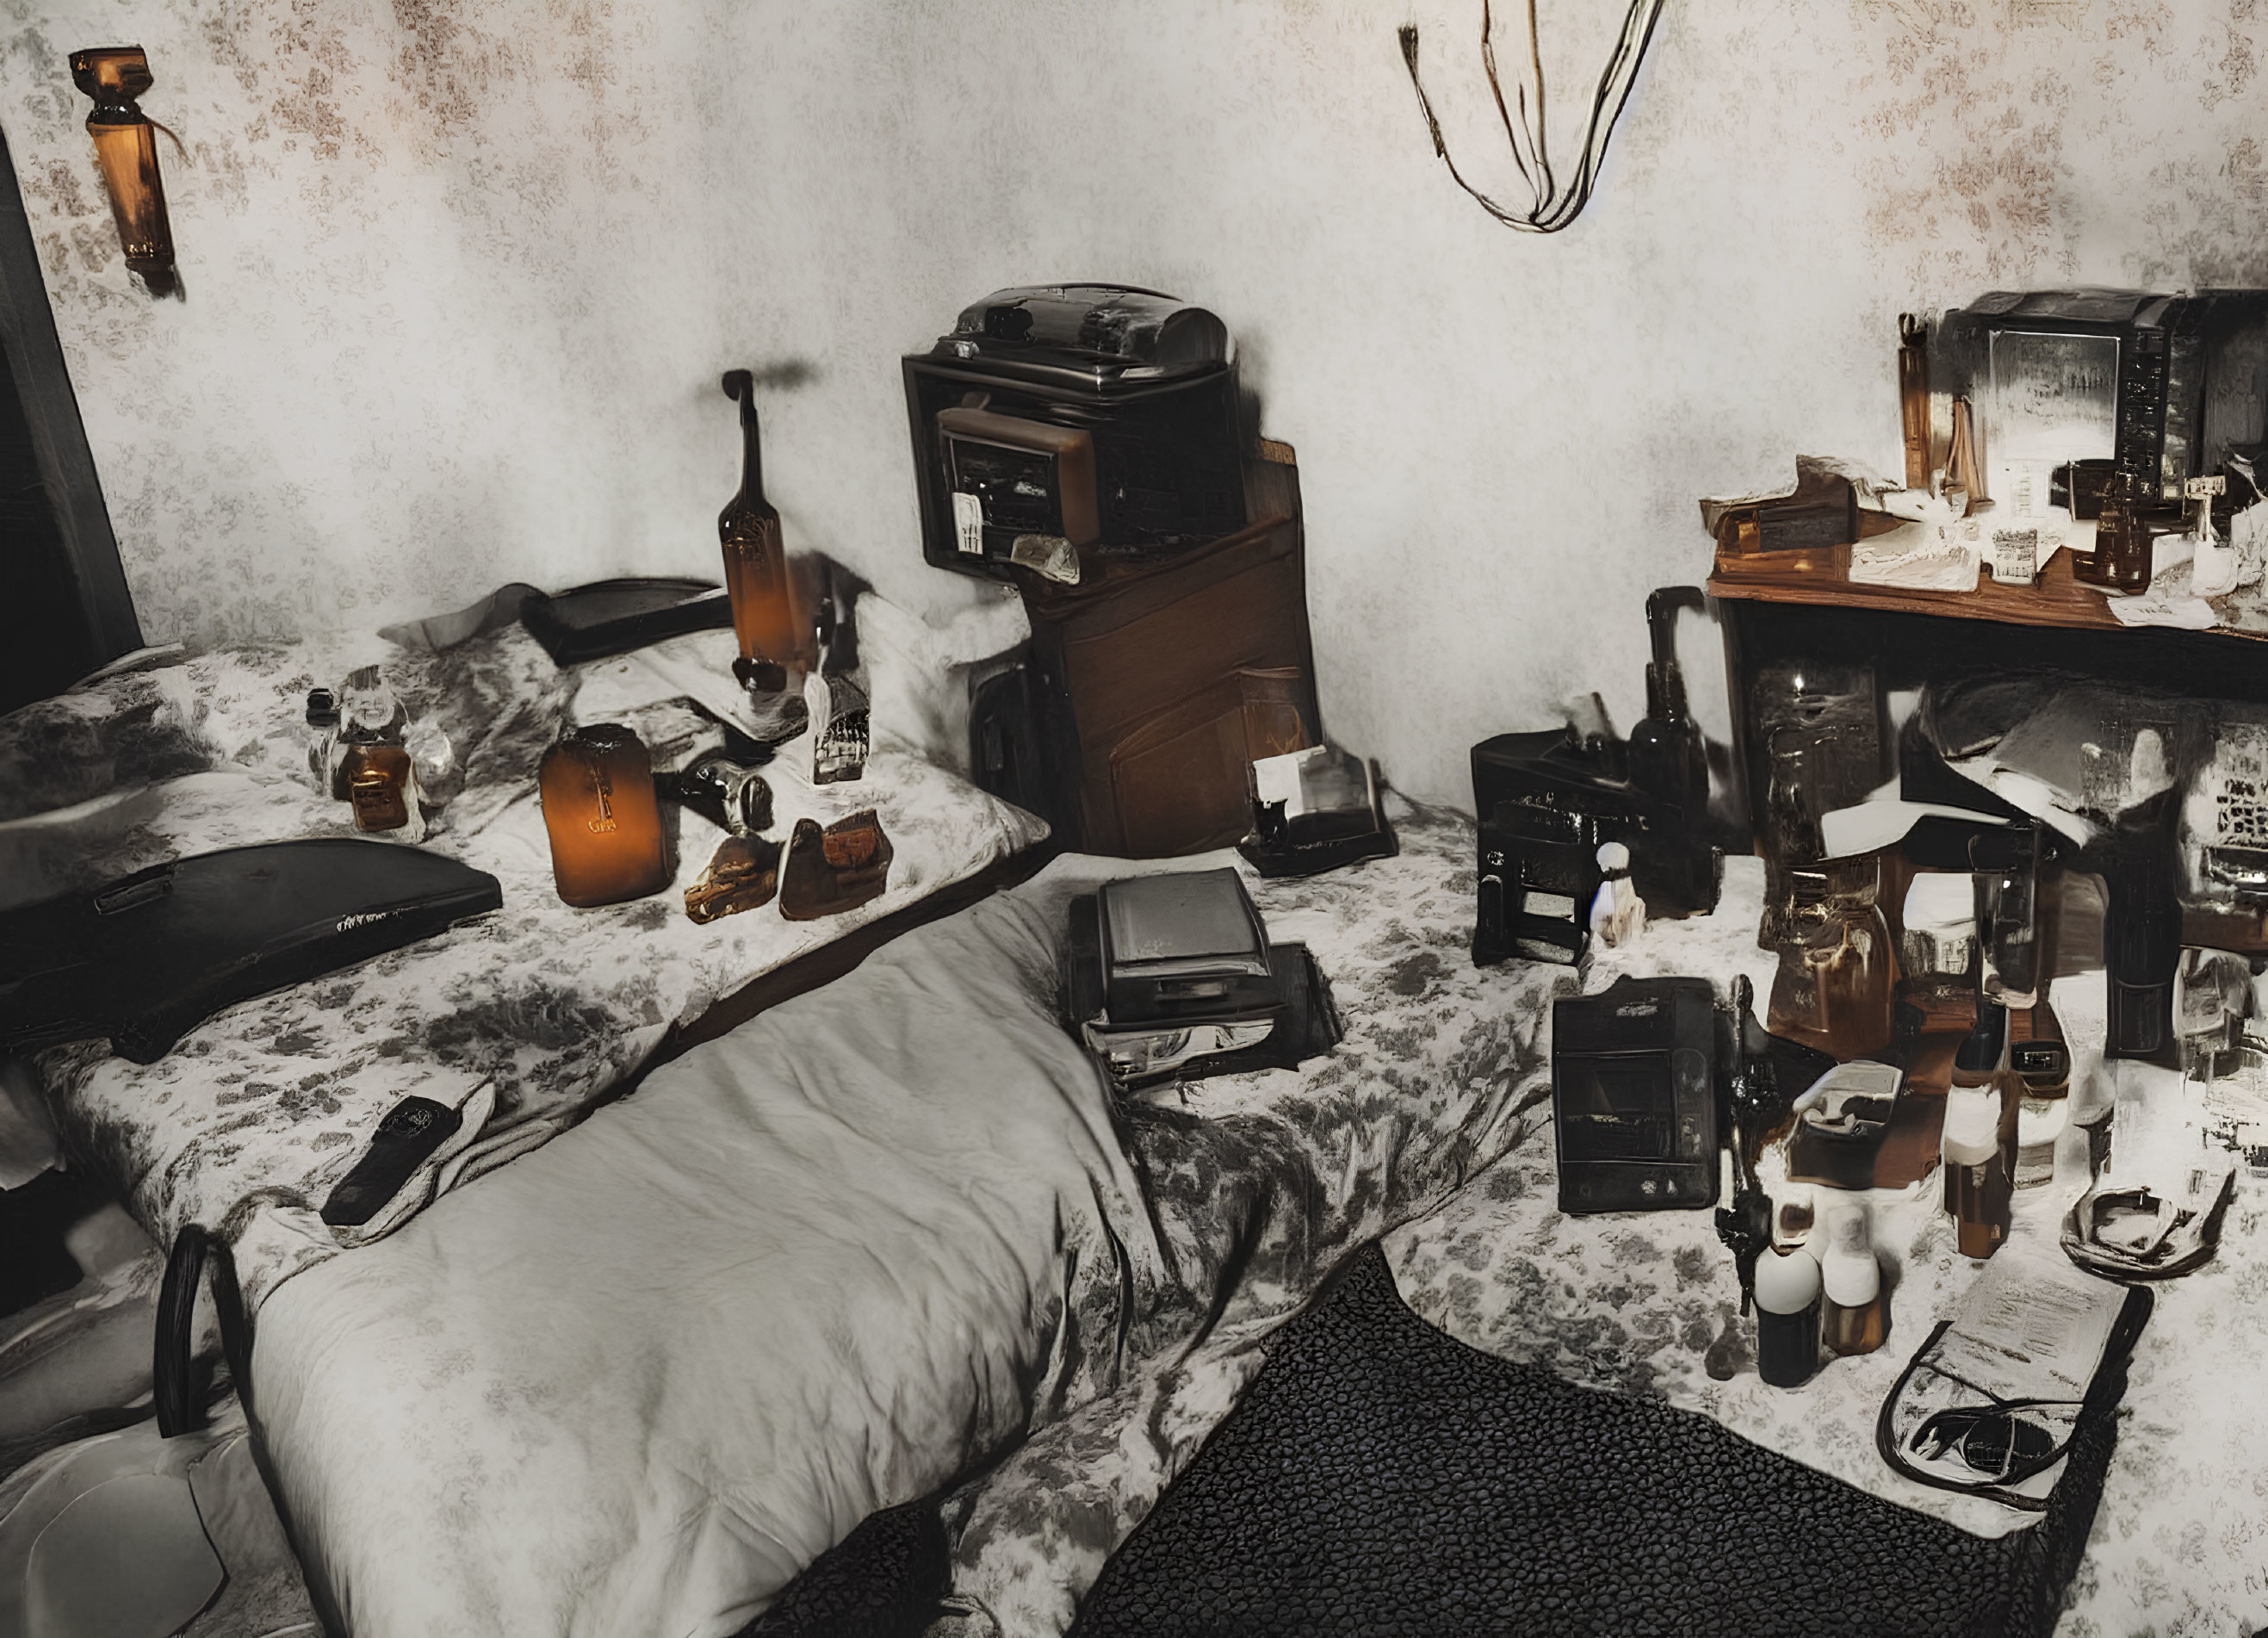 Cluttered room with disheveled bed and vintage items